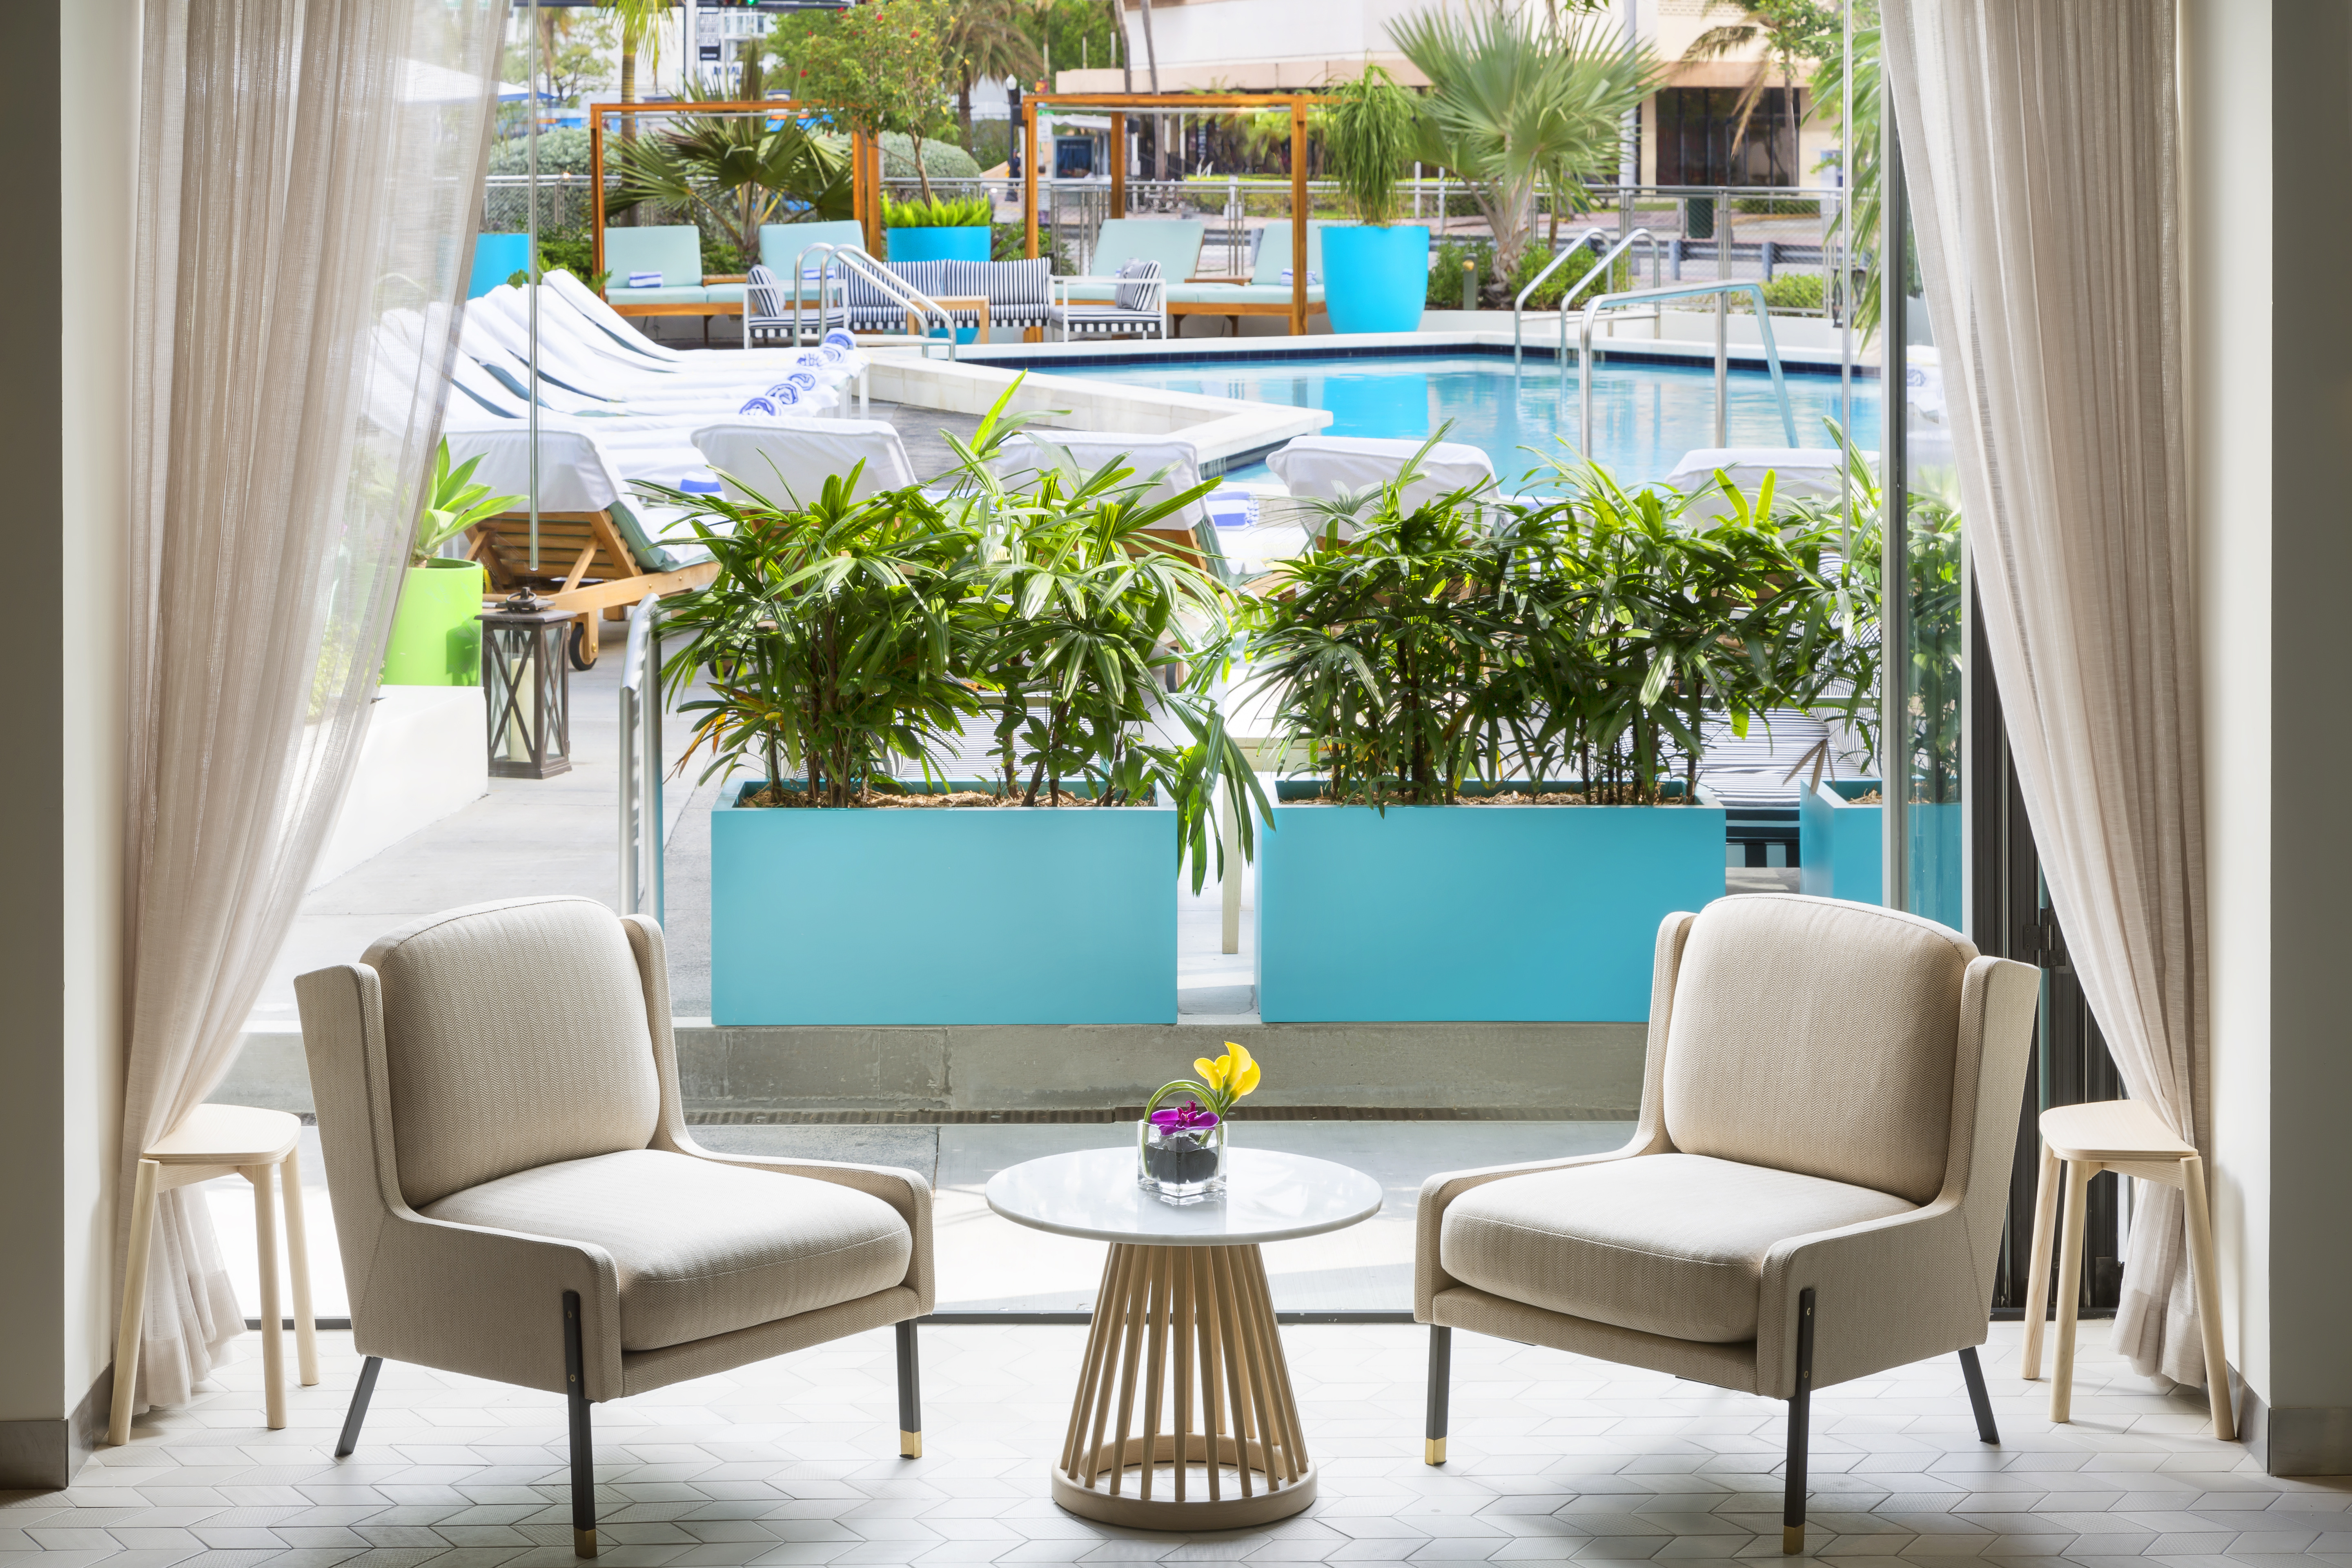 Lobby Seating Area with Two Soft Chairs, Small Table and Outdoor Pool